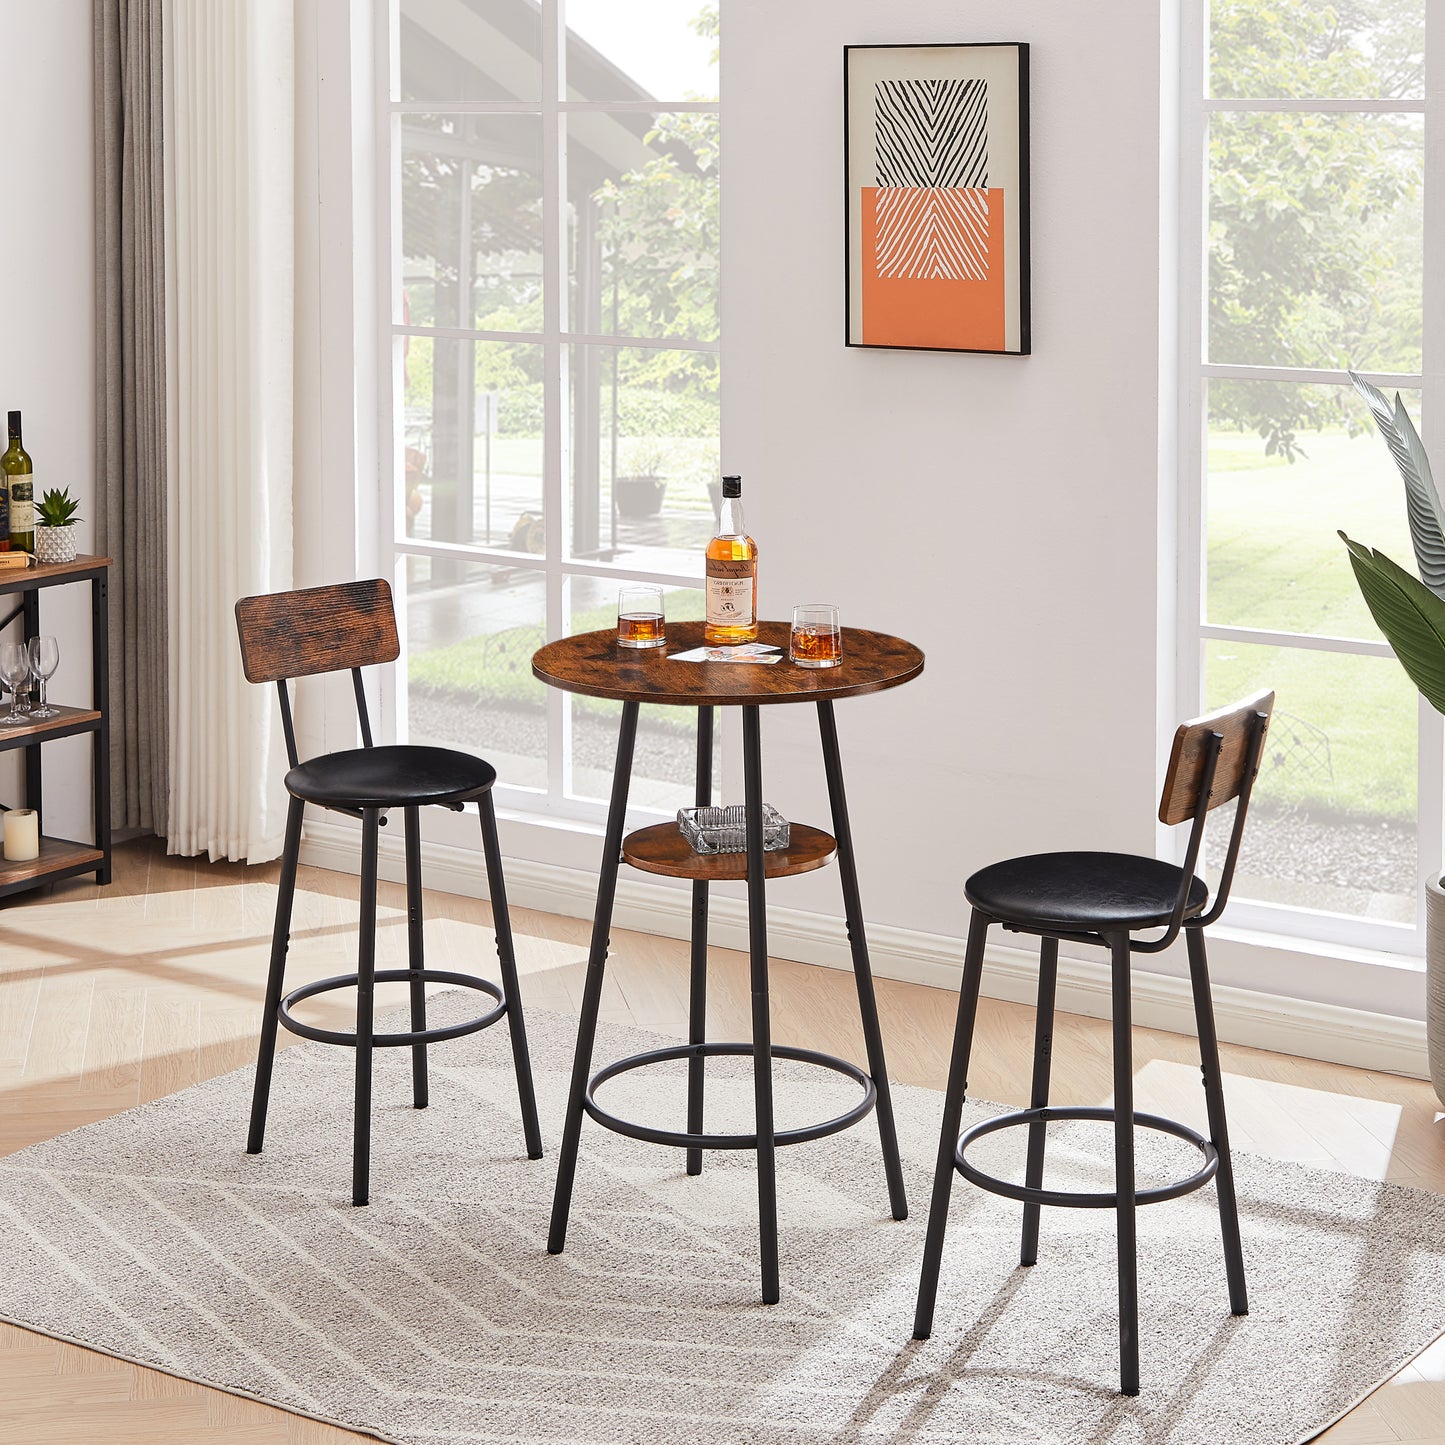 Round Bar Stool Set with Shelf - Rustic Brown